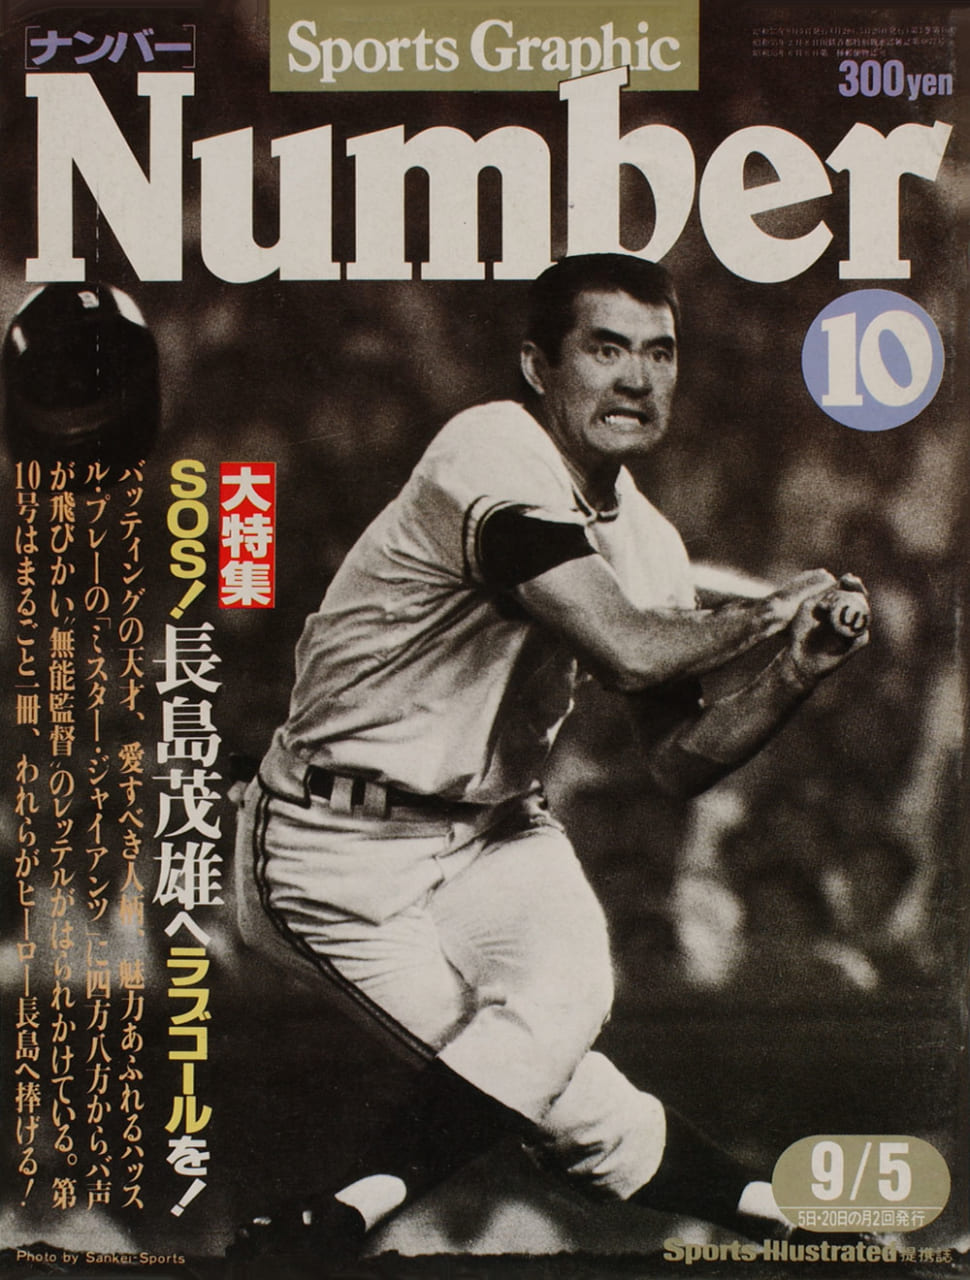 Sports Graphic Number 10号
1980年8月20日発売
表紙撮影：遠藤忠